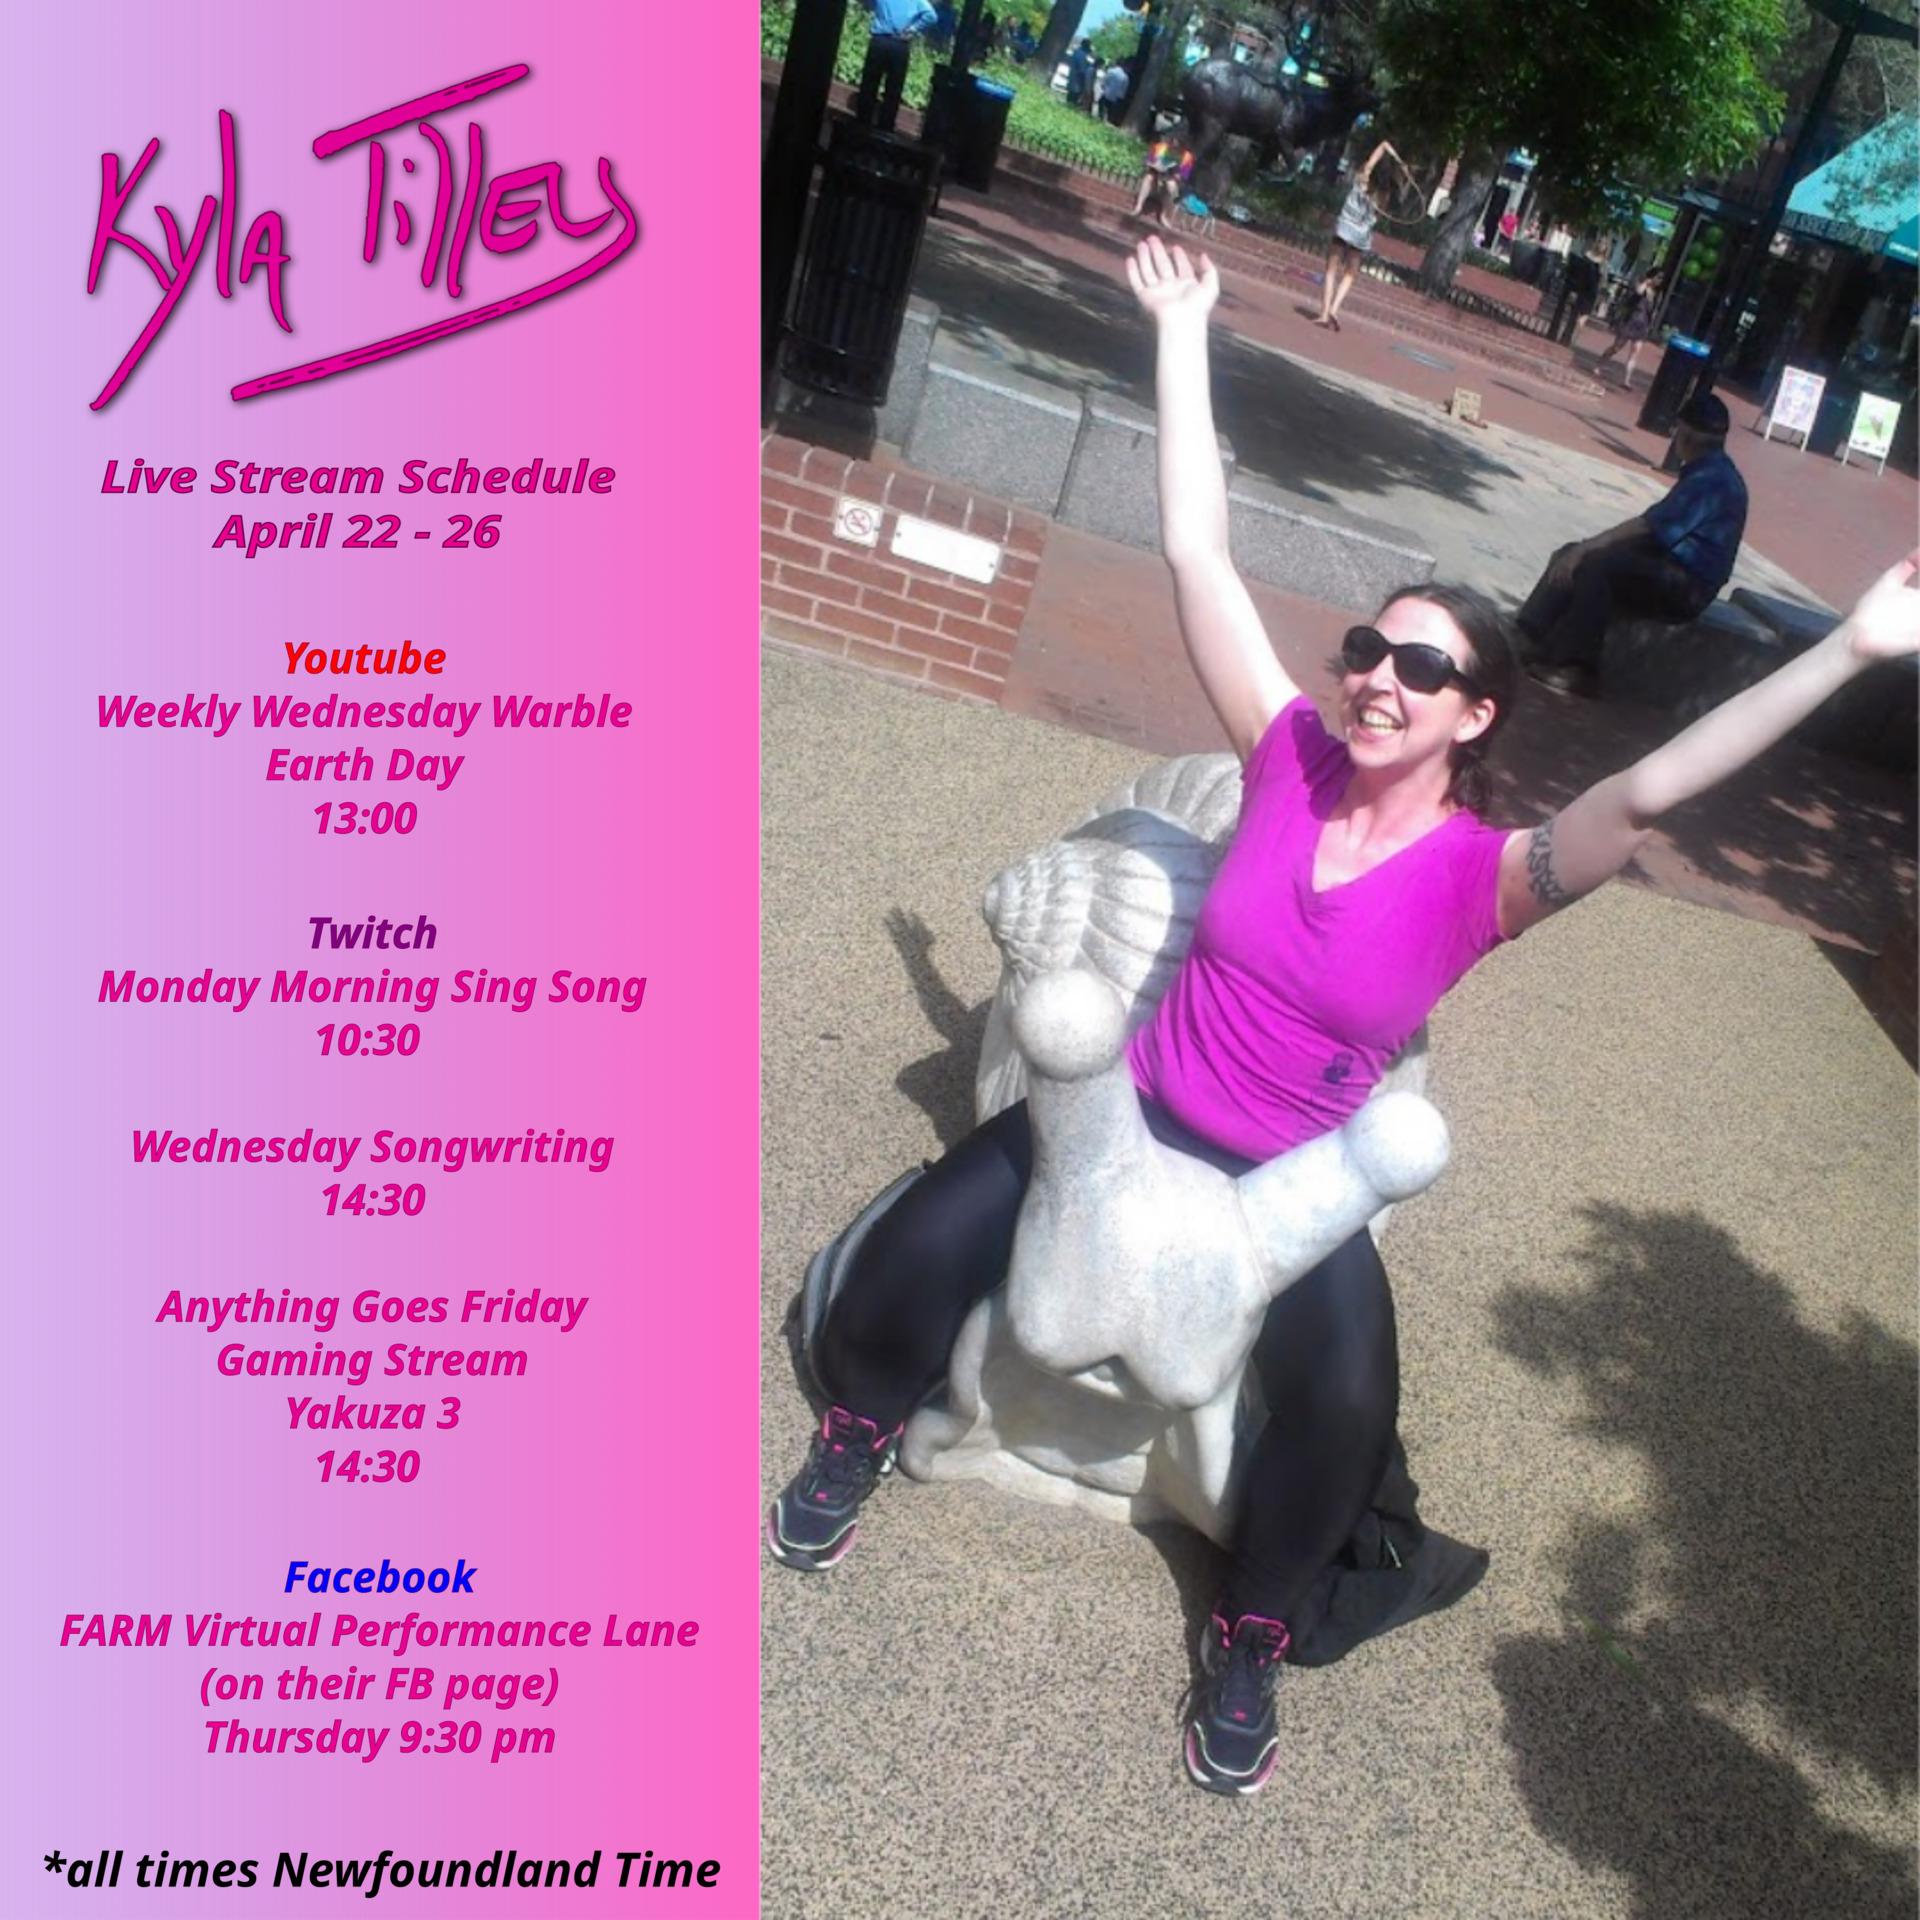 
A white woman with big movie star sunglasses and a pink T-shirt, black leggings, and pink and black sneakers riding a giant snail statue with her hands held aloft in excitement for she is going so fast!!


Kyla Tilley's live stream schedule April 22 - 26
On Youtube: Earth Day
13:00

On Twitch:
Monday Morning Sing Song 10:30
Wednesday Songwriting 14:30
Anything Goes Friday: Gaming Stream Yakuza 3 14:30

All times posted in UTC -2:30

